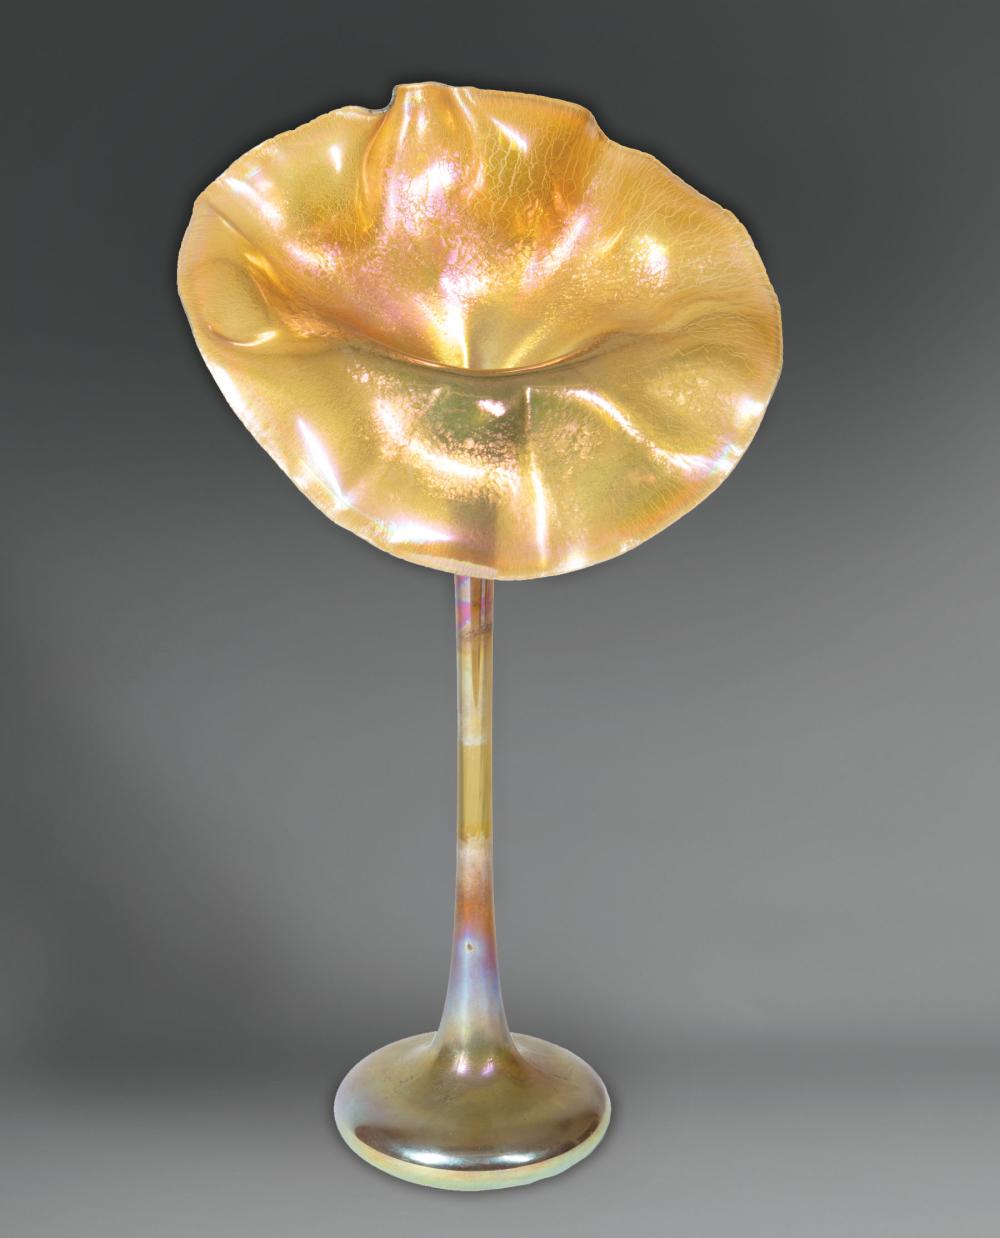 TIFFANY FAVRILE GLASS "JACK-IN-THE-PULPIT"